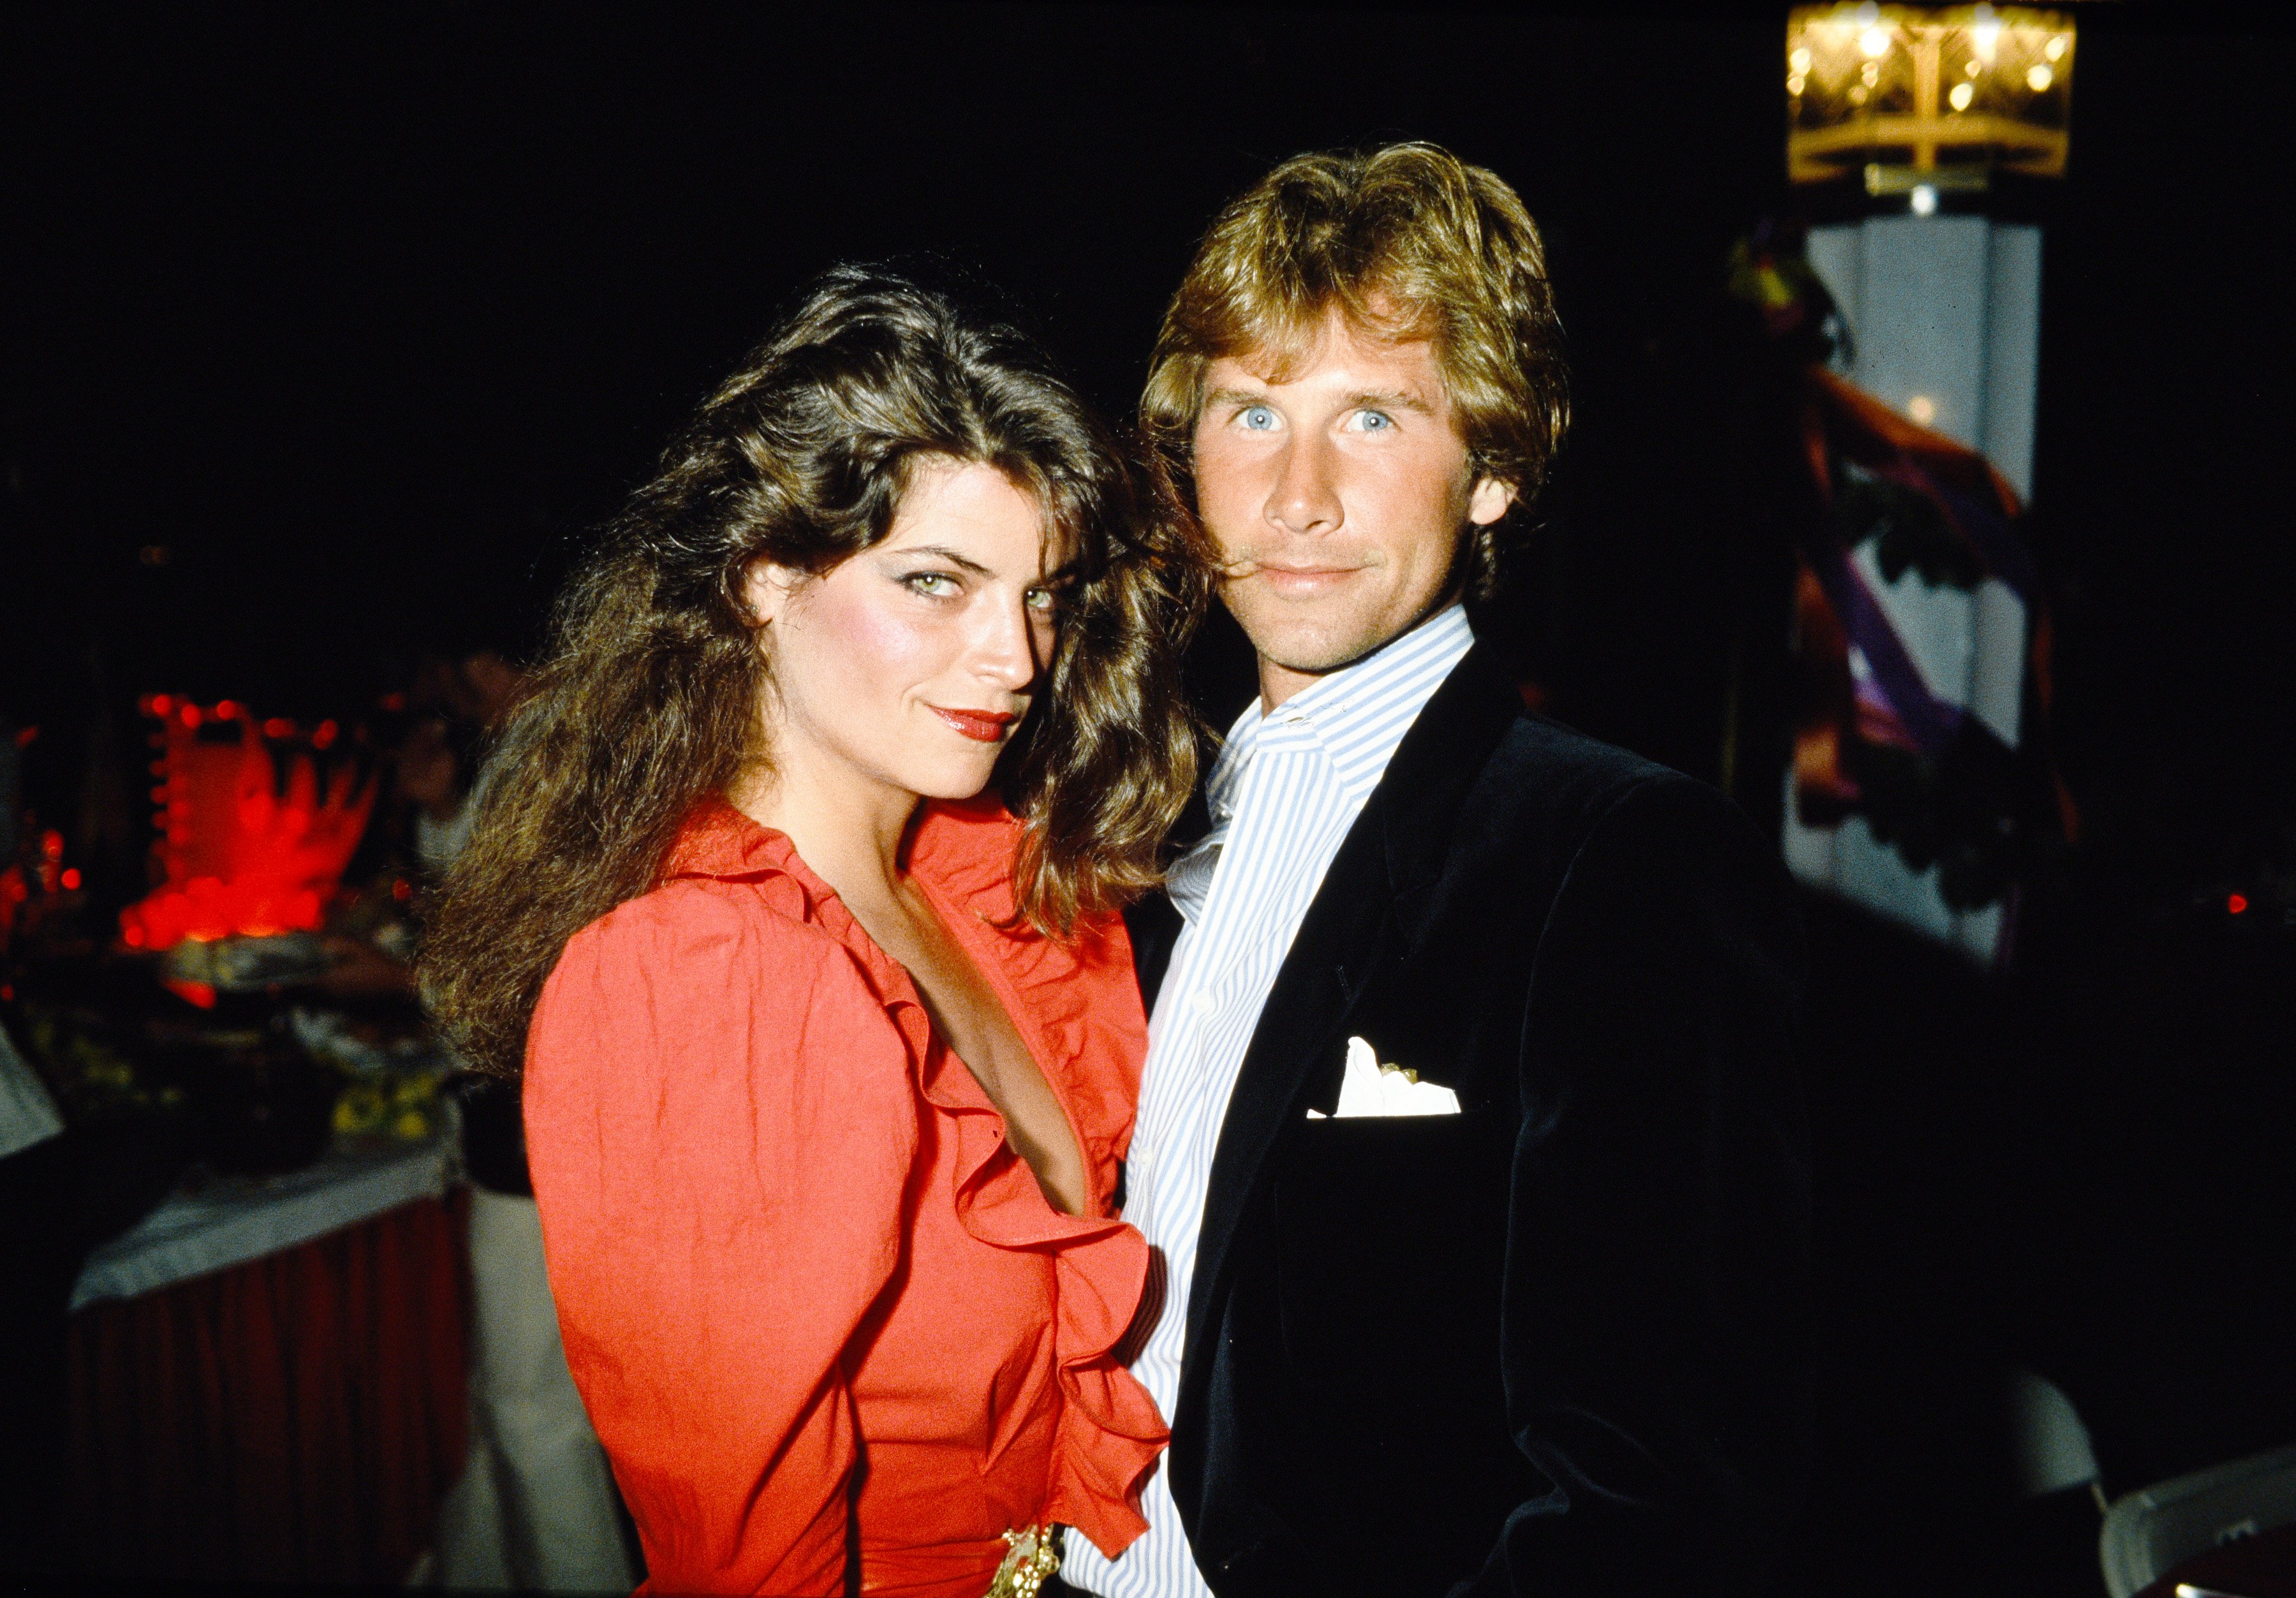 Kirstie Alley and Parker Stevenson, on December 22, 1983. | Source: Getty Images 